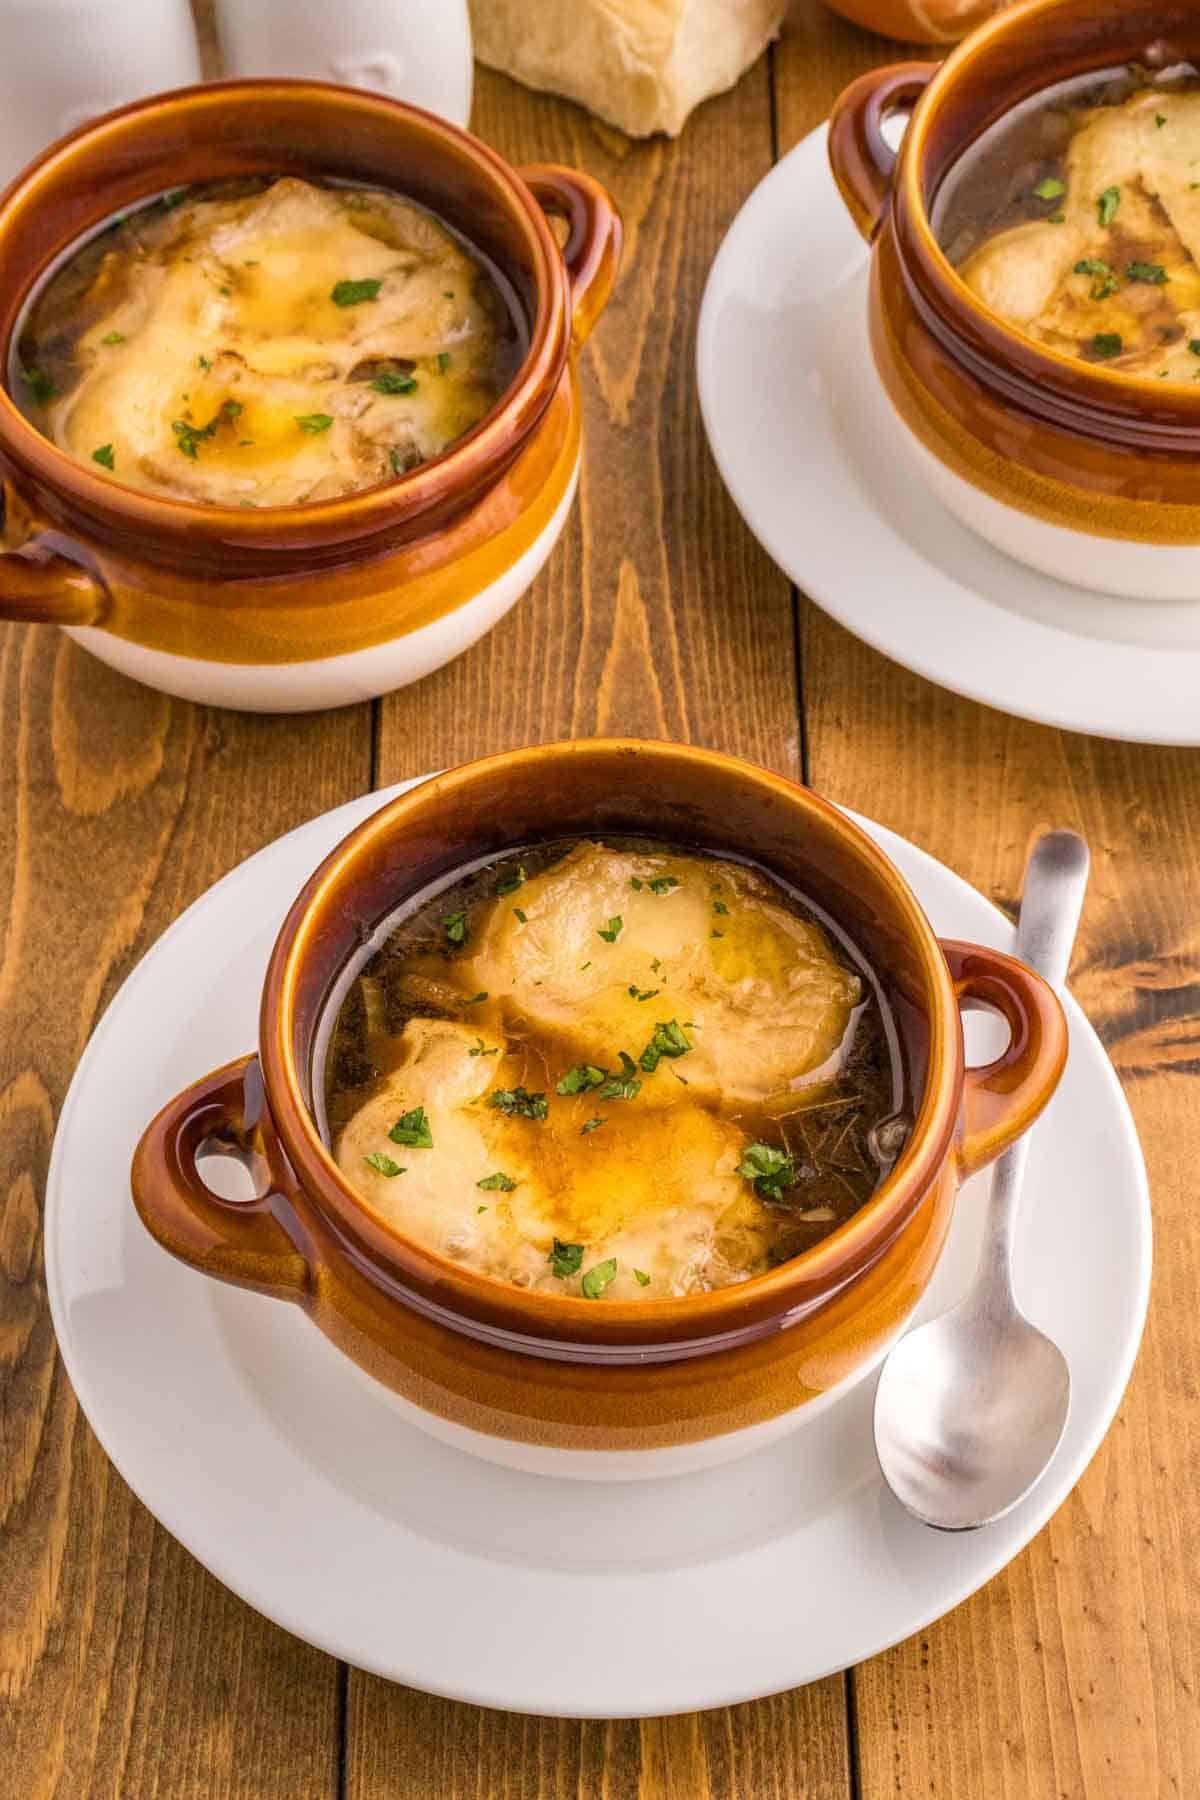 Easy French Onion Soup is a delicious soup with a beef broth base loaded with caramelized onions and topped with baked slices of French baguette and melted Gruyere or Swiss cheese.